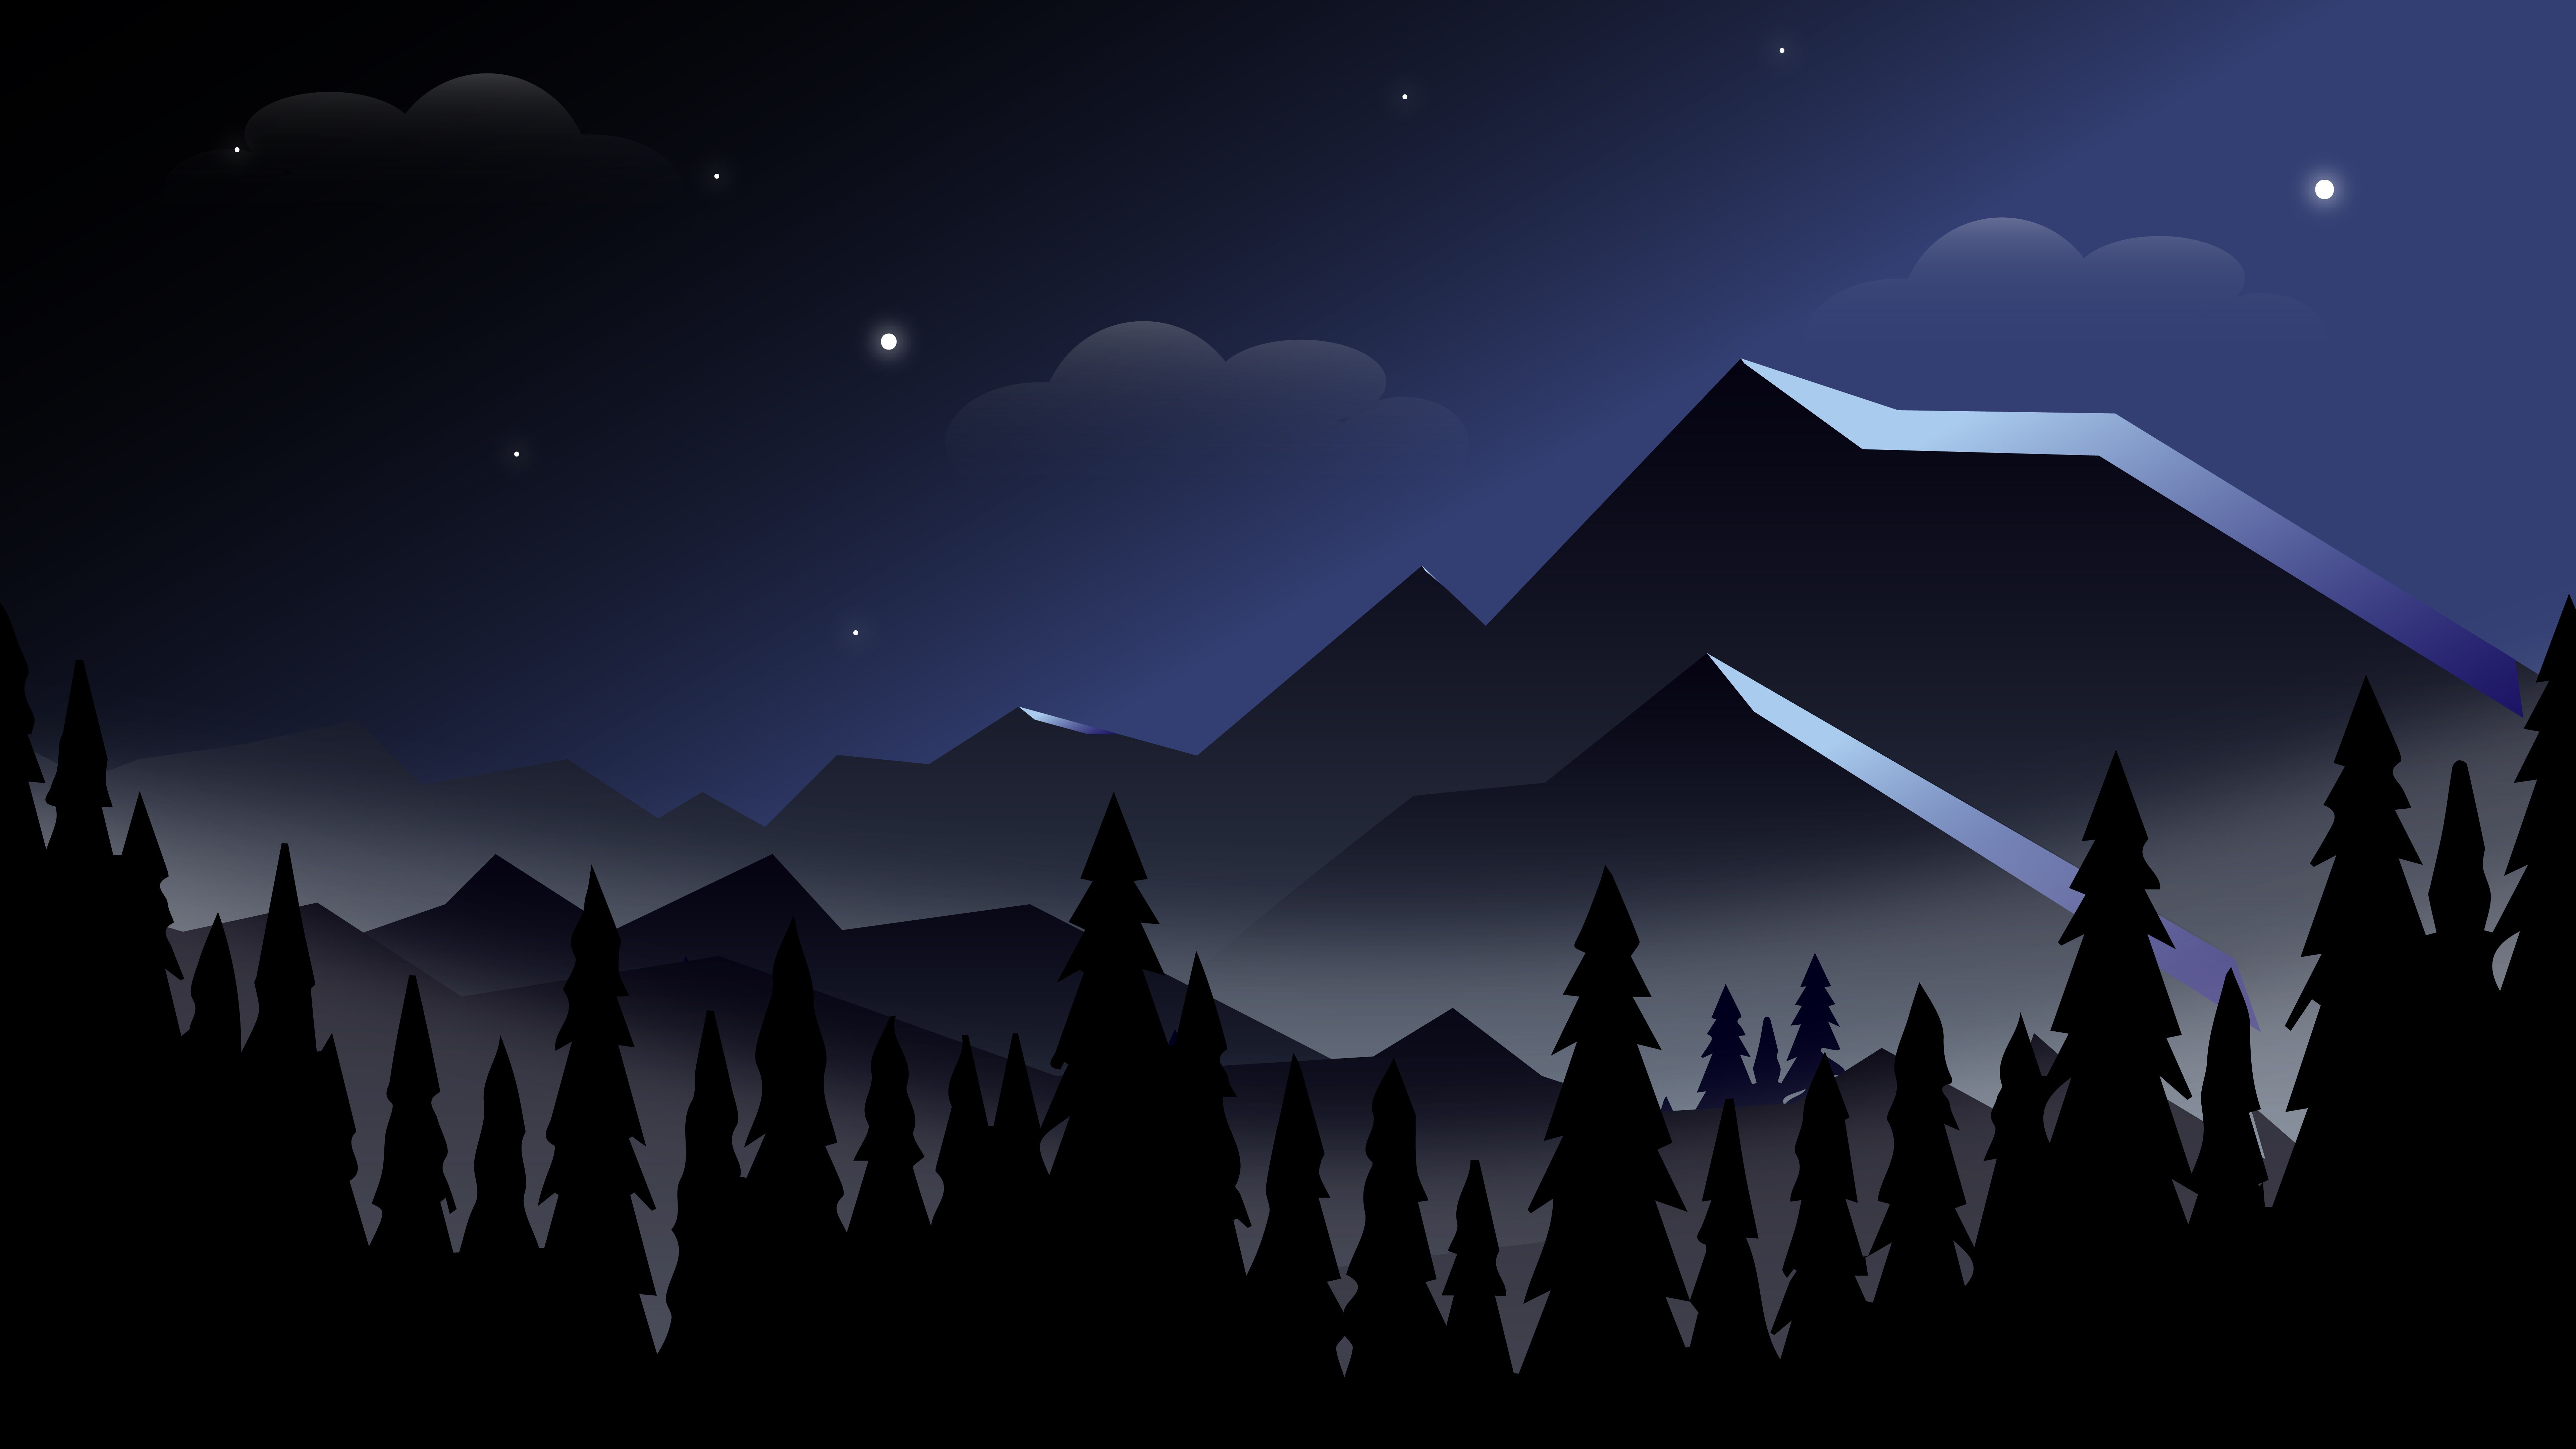 Night Mountains Minimalist 8k, HD Artist, 4k Wallpaper, Image, Background, Photo and Picture